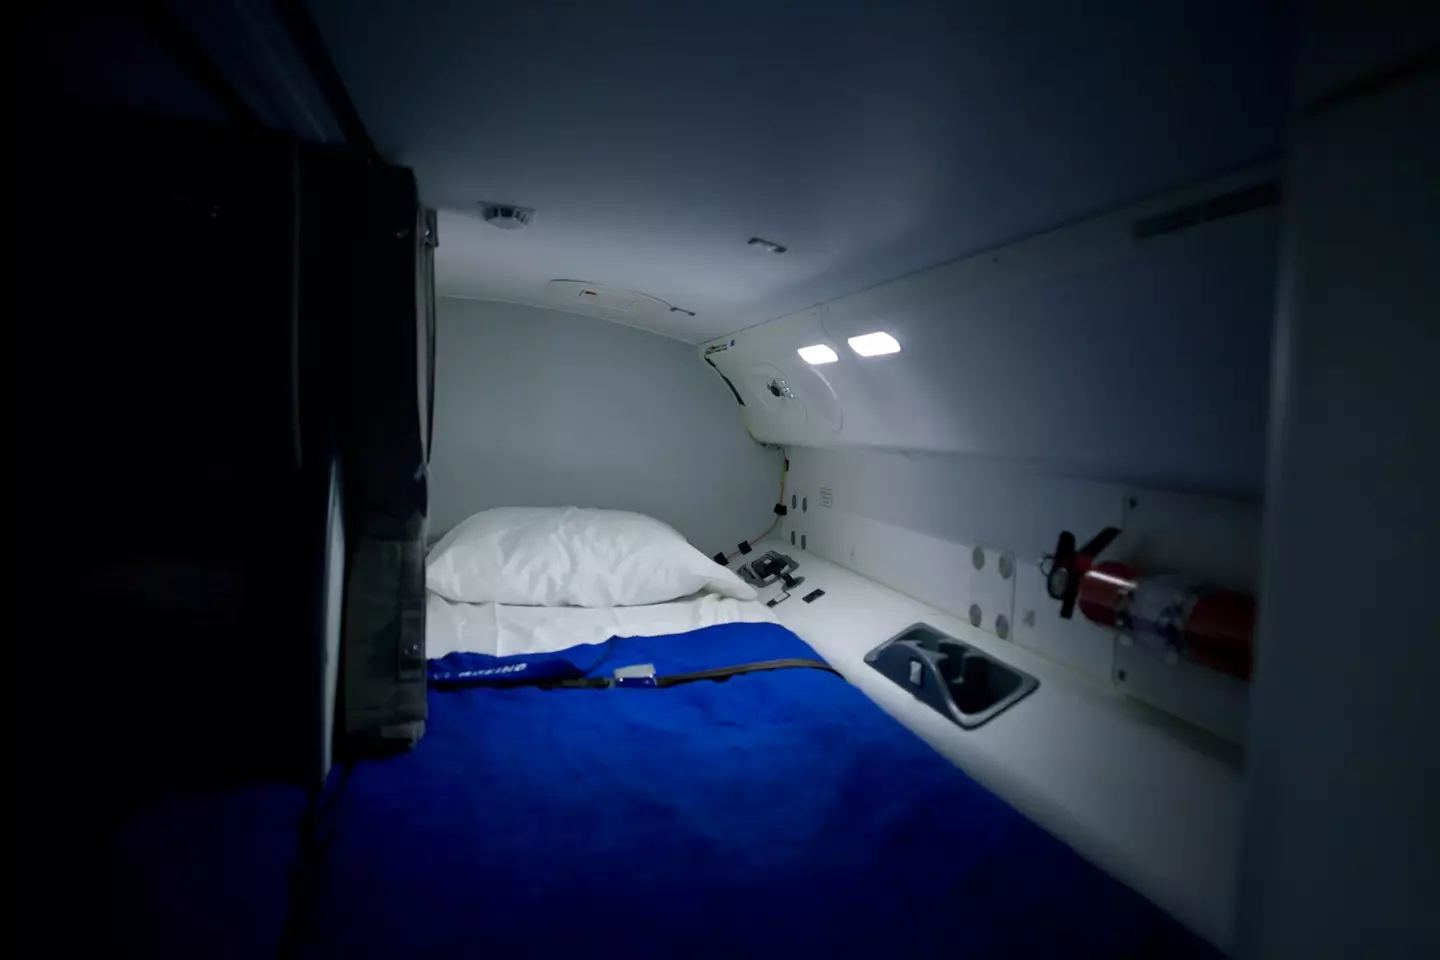 The rooms could be directly above you on board. (Pictures Ltd./Corbis via Getty Images)